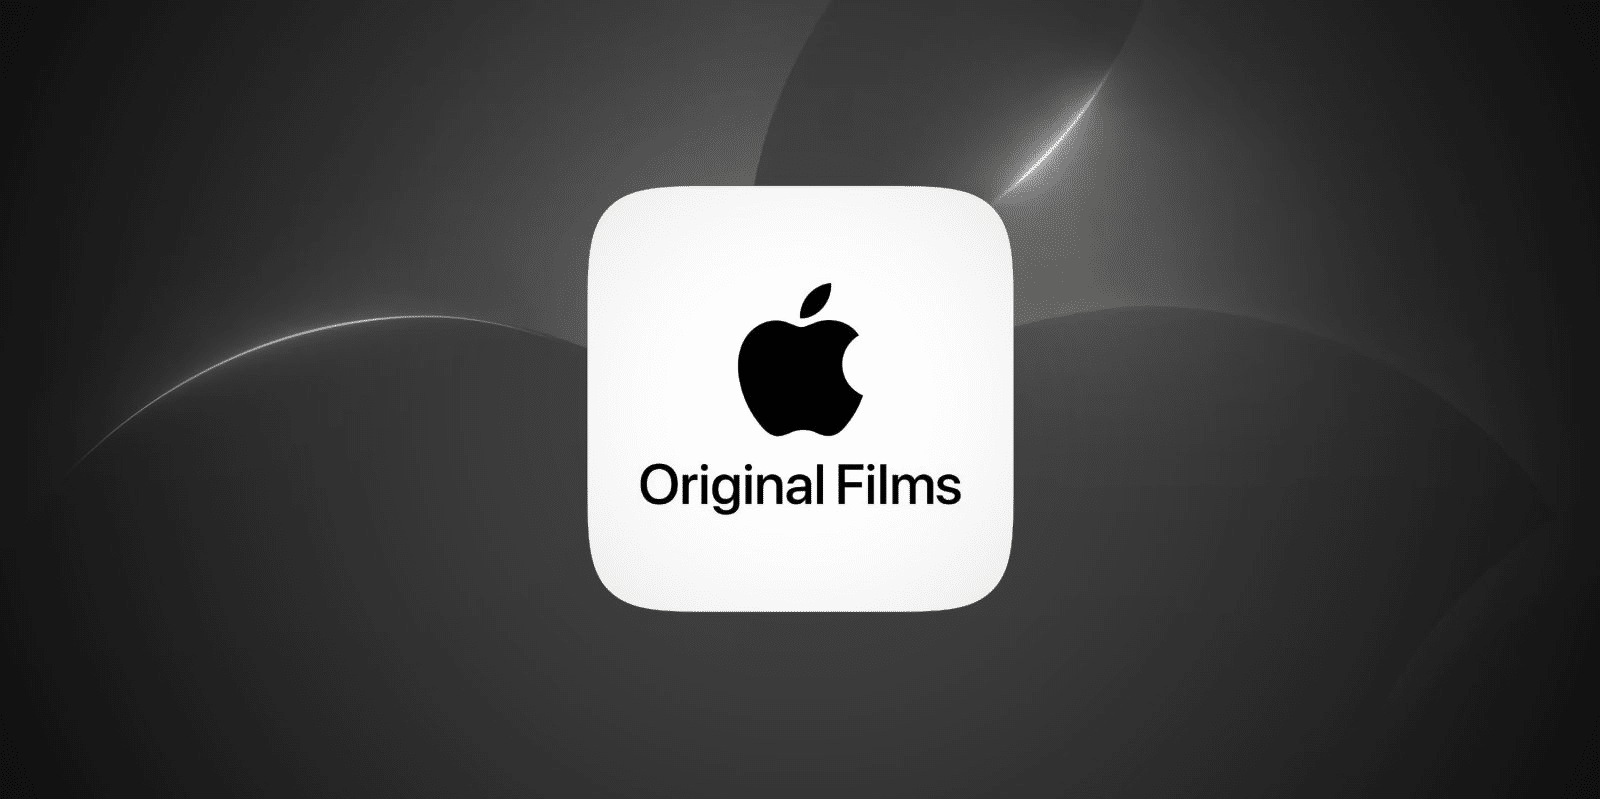 Apple TV+ Expands Social Media Presence with Launch of @AppleFilms Account.